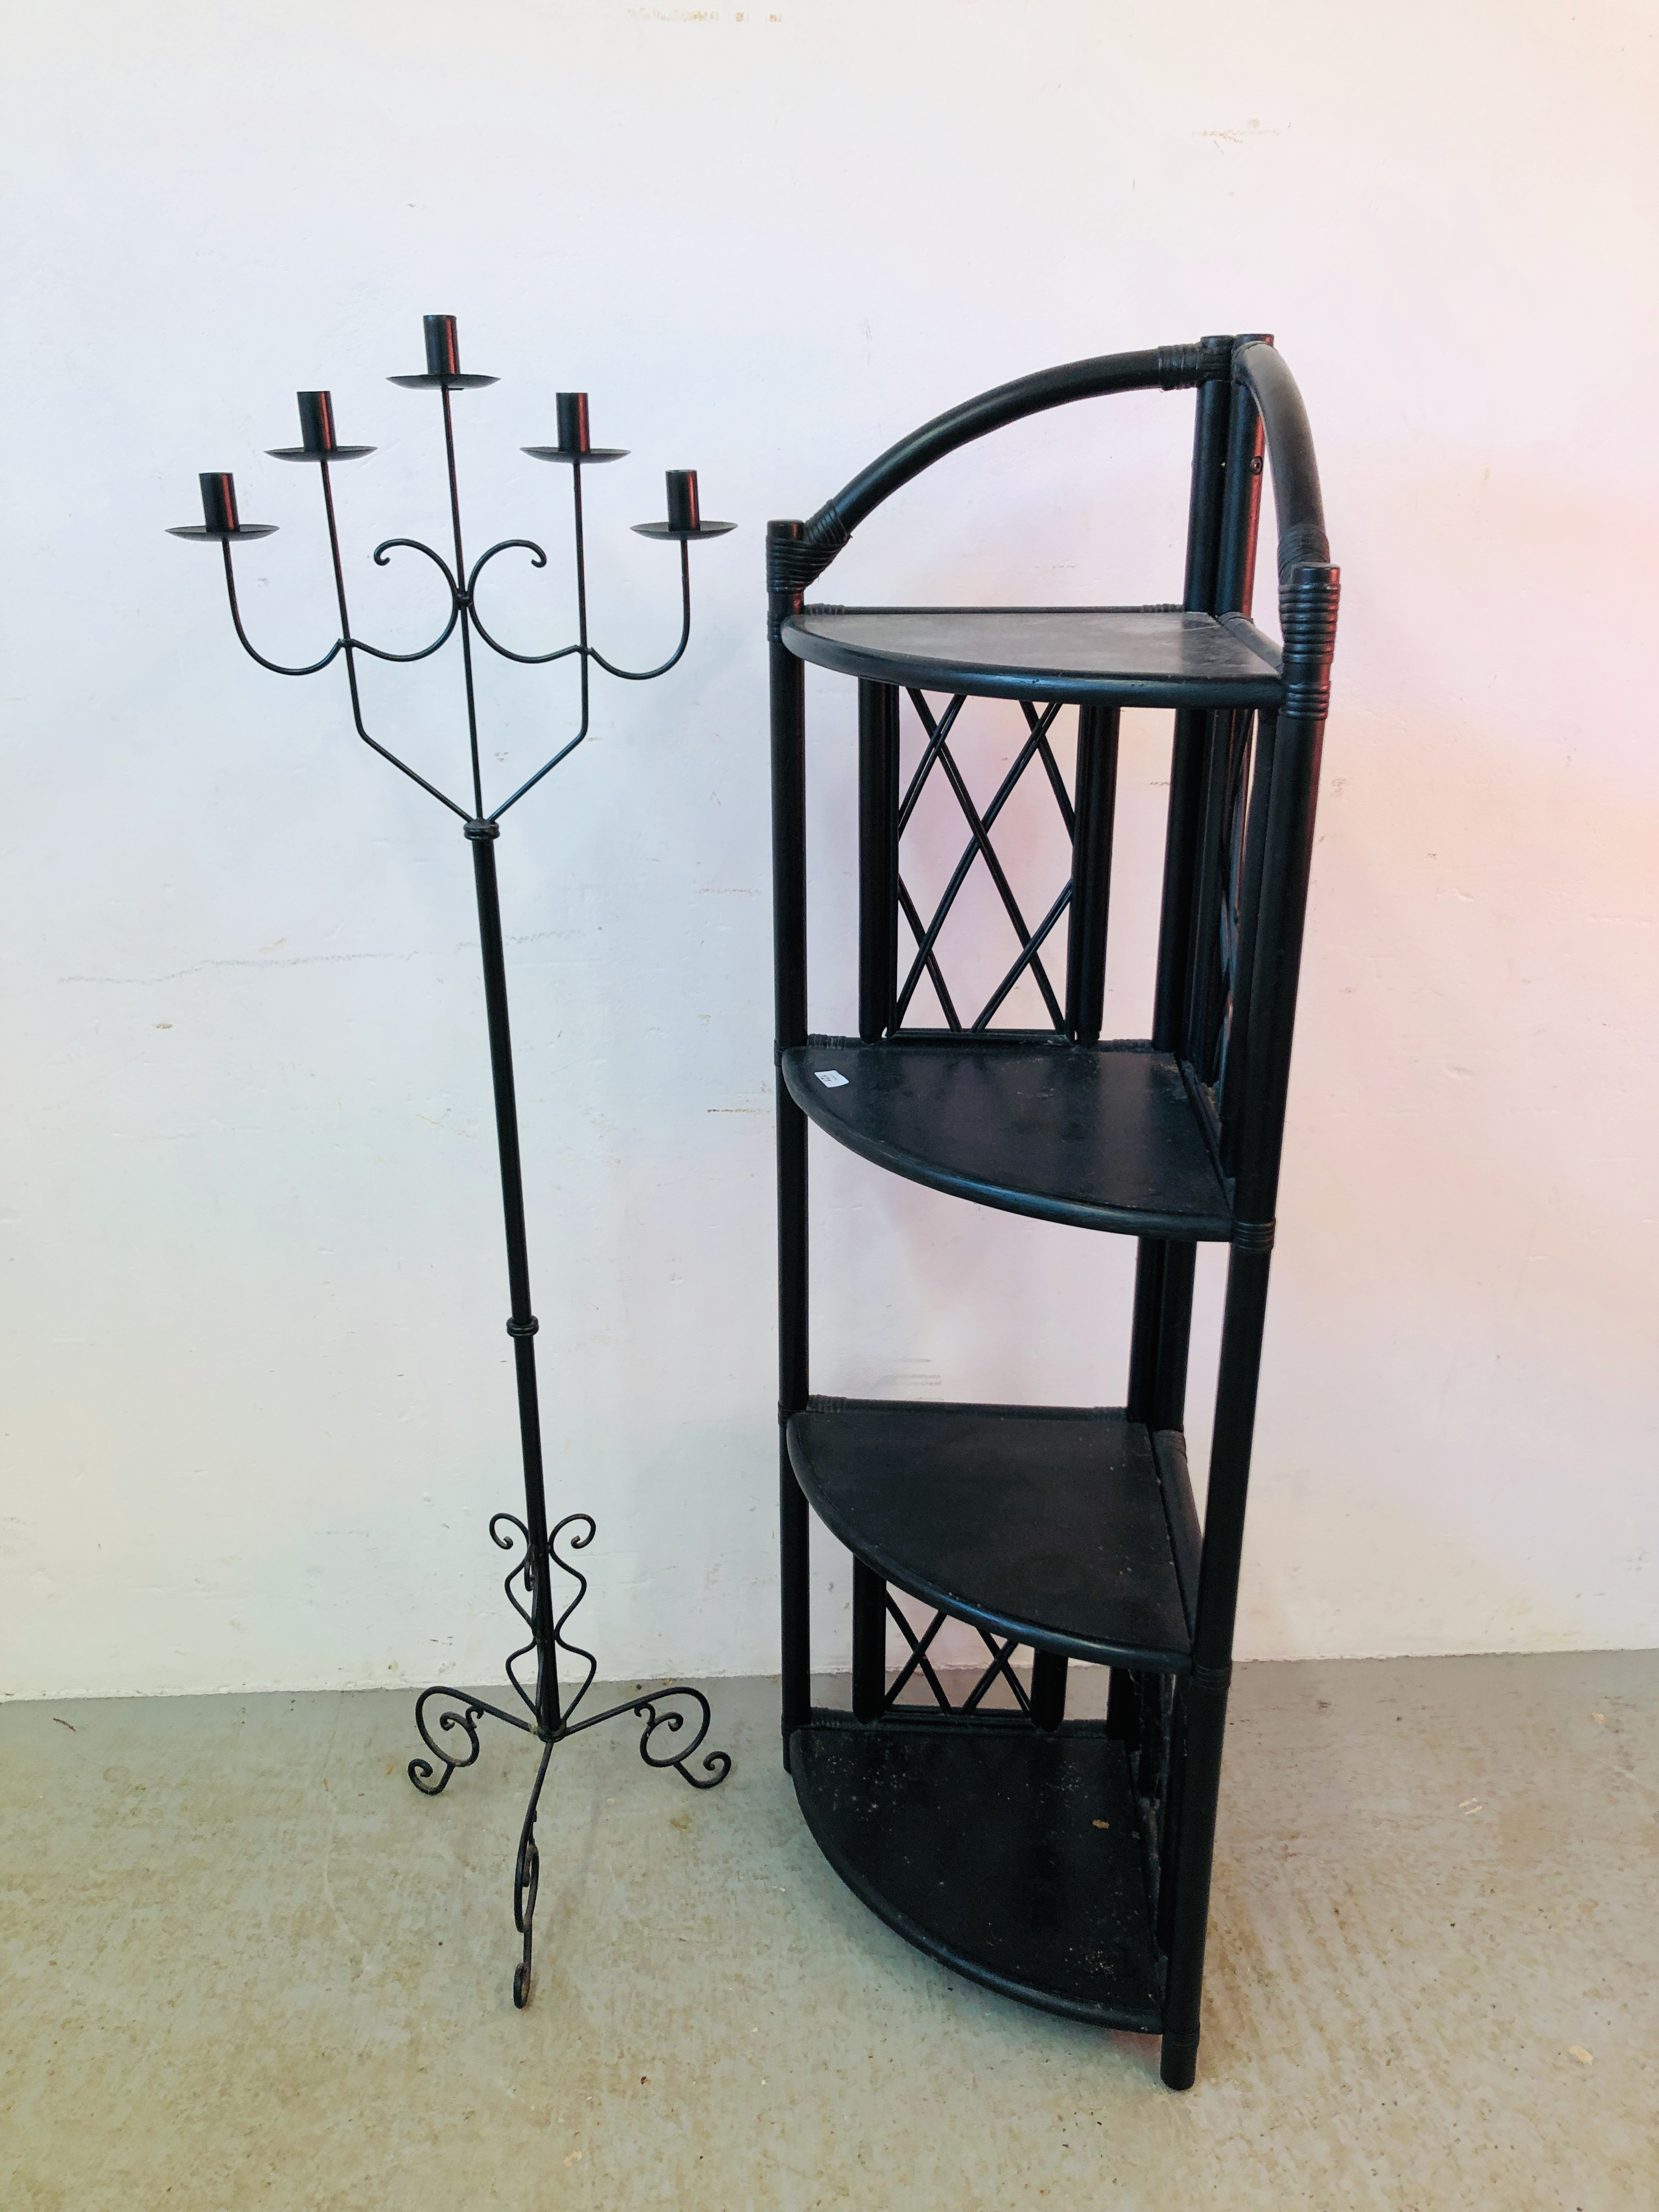 A CANE WORK FOUR TIER CORNER STAND AND A METAL CRAFT FLOOR STANDING CANDELABRA